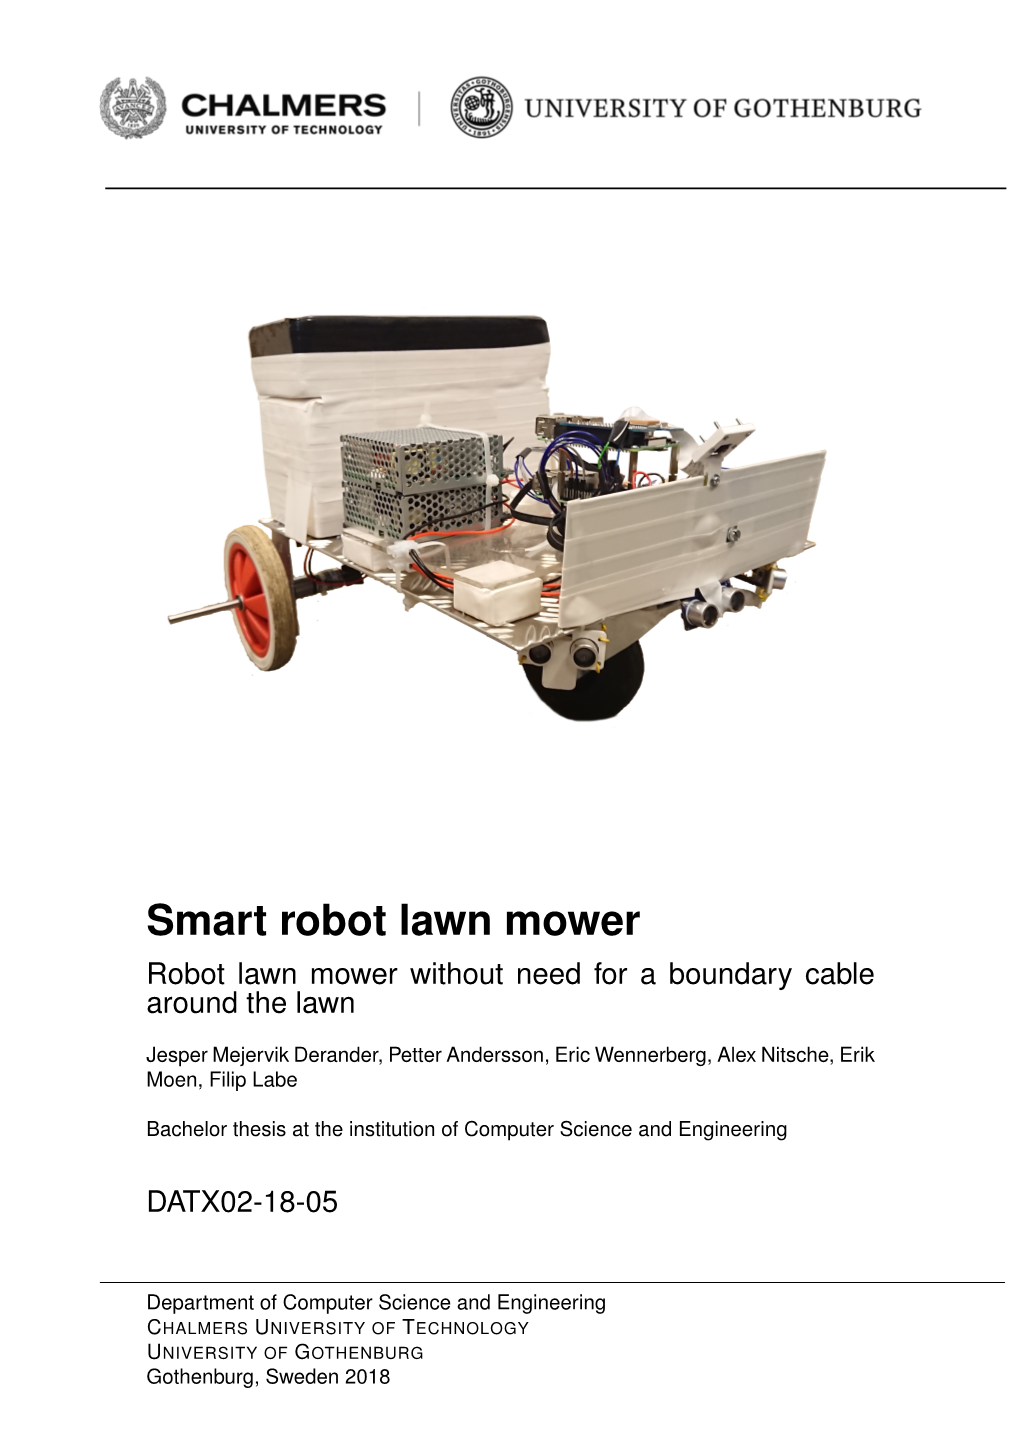 Smart Robot Lawn Mower Robot Lawn Mower Without Need for a Boundary Cable Around the Lawn